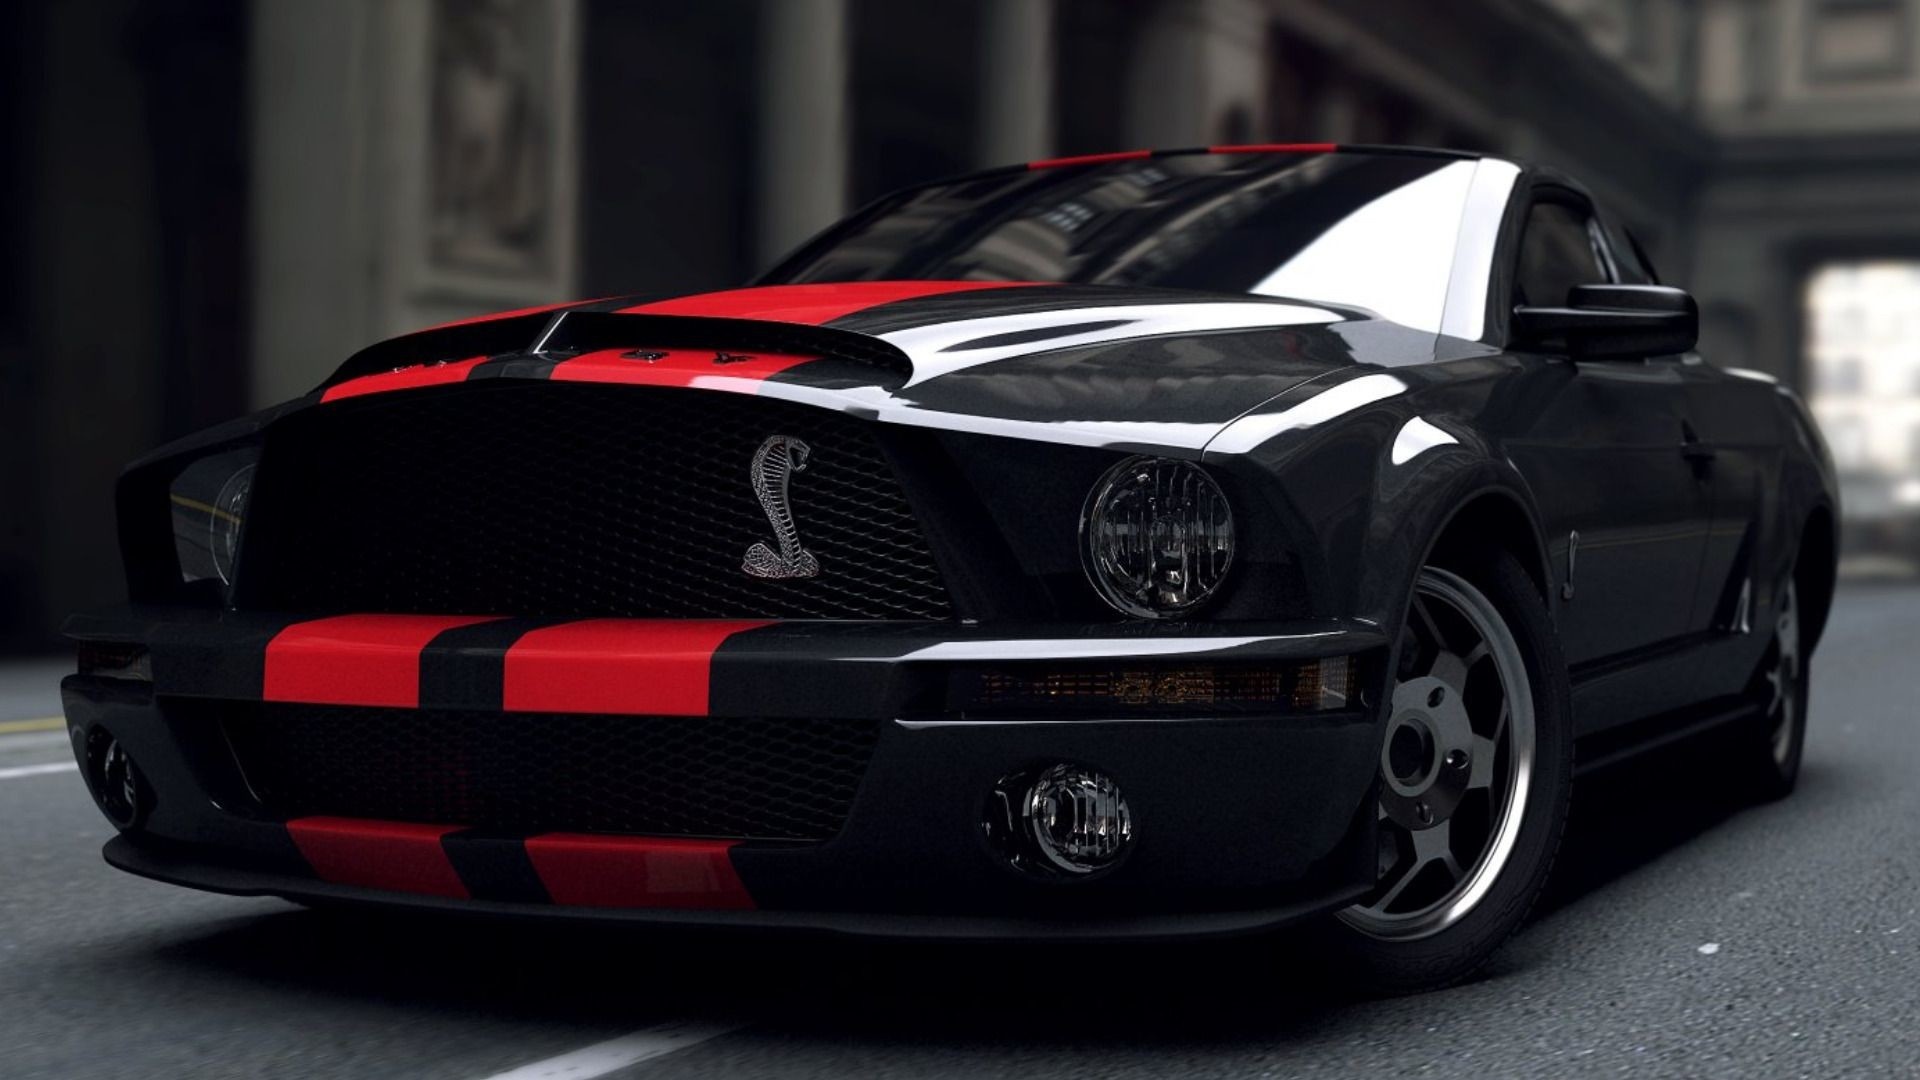 Ford Mustang: The model has an exclusive record in the automotive industry, Automotive design. 1920x1080 Full HD Wallpaper.